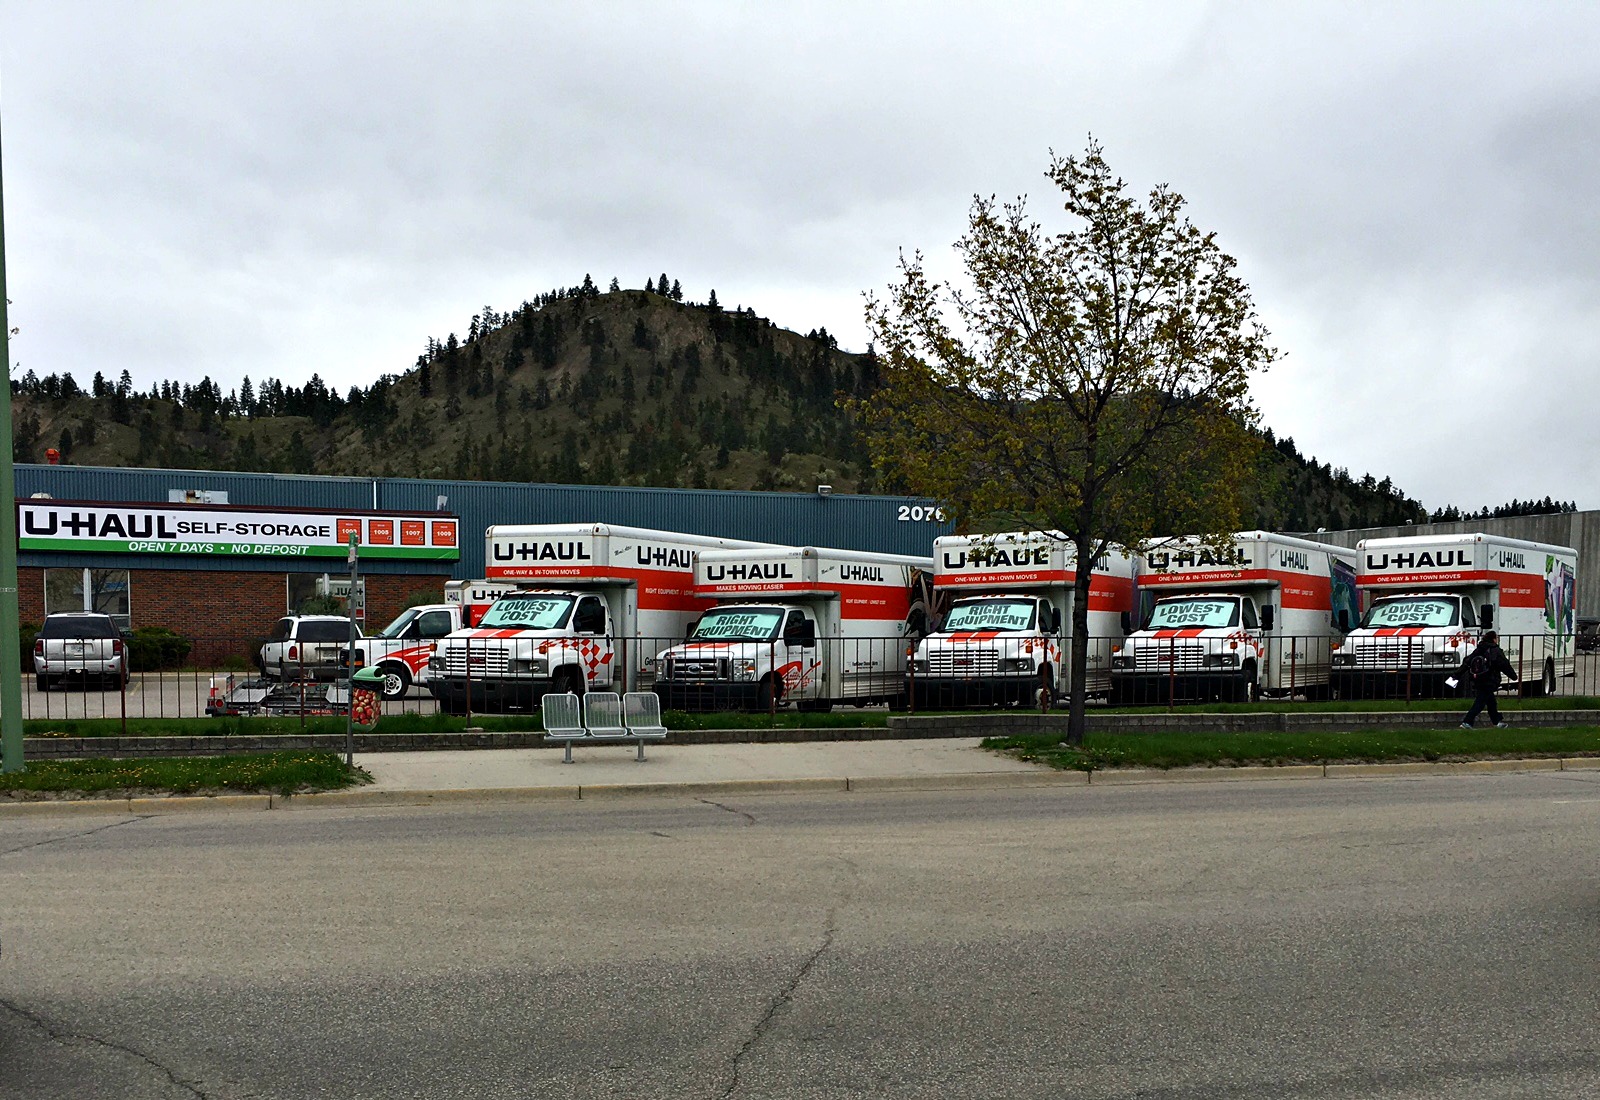 U-Haul Offers 30 Days of Free U-Box Container Usage to Kelowna Flood Victims